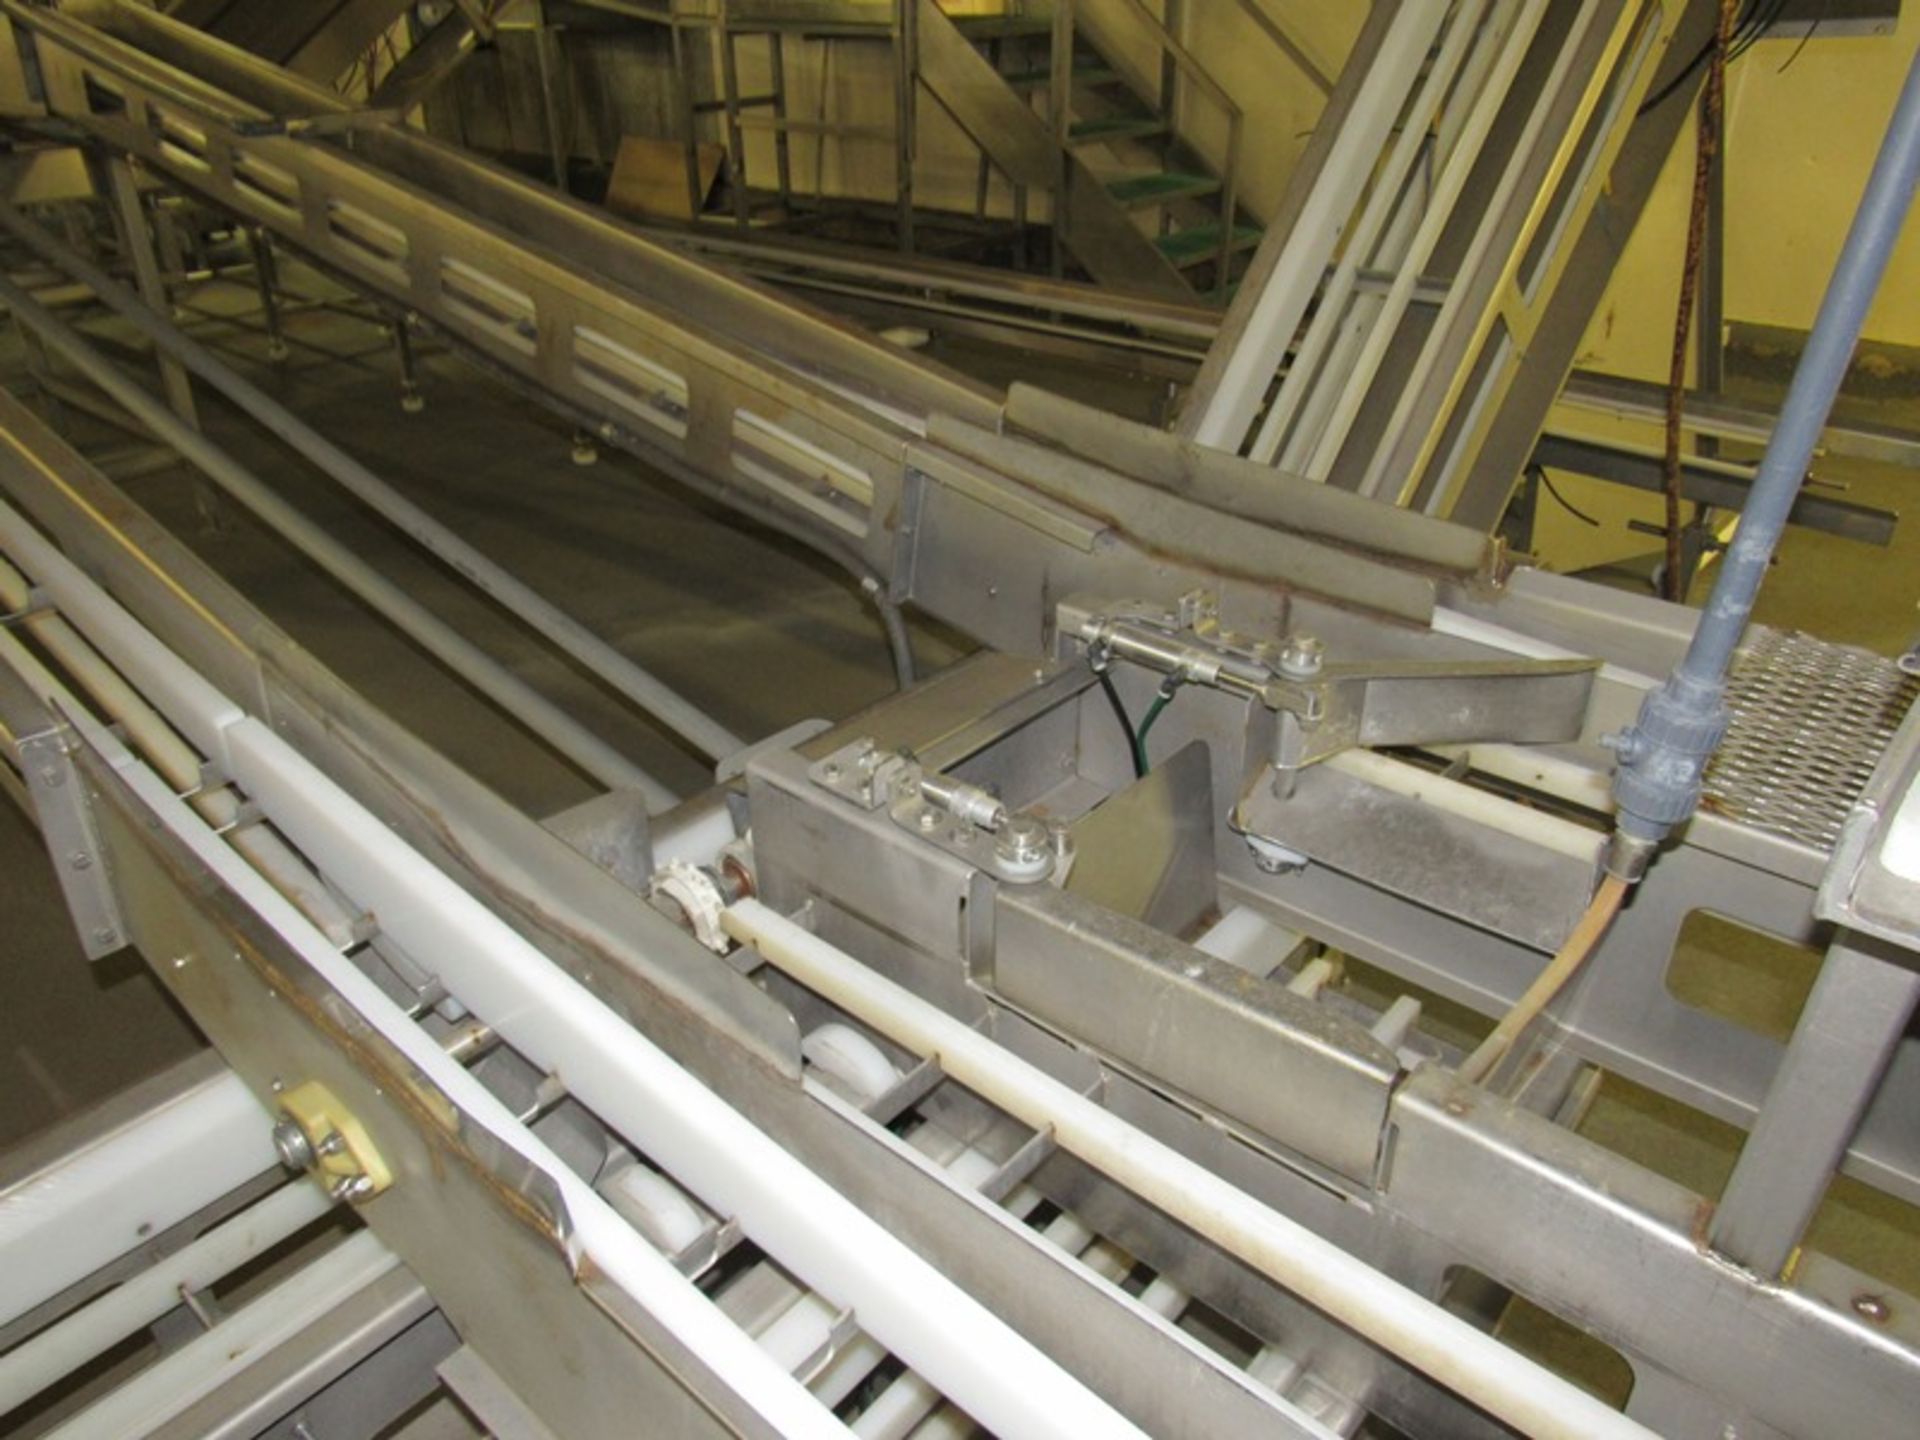 C.A.T. Stainless Steel Grading Line, dual lanes, 10 positions per lane, pneumatic drop chutes, - Image 8 of 18